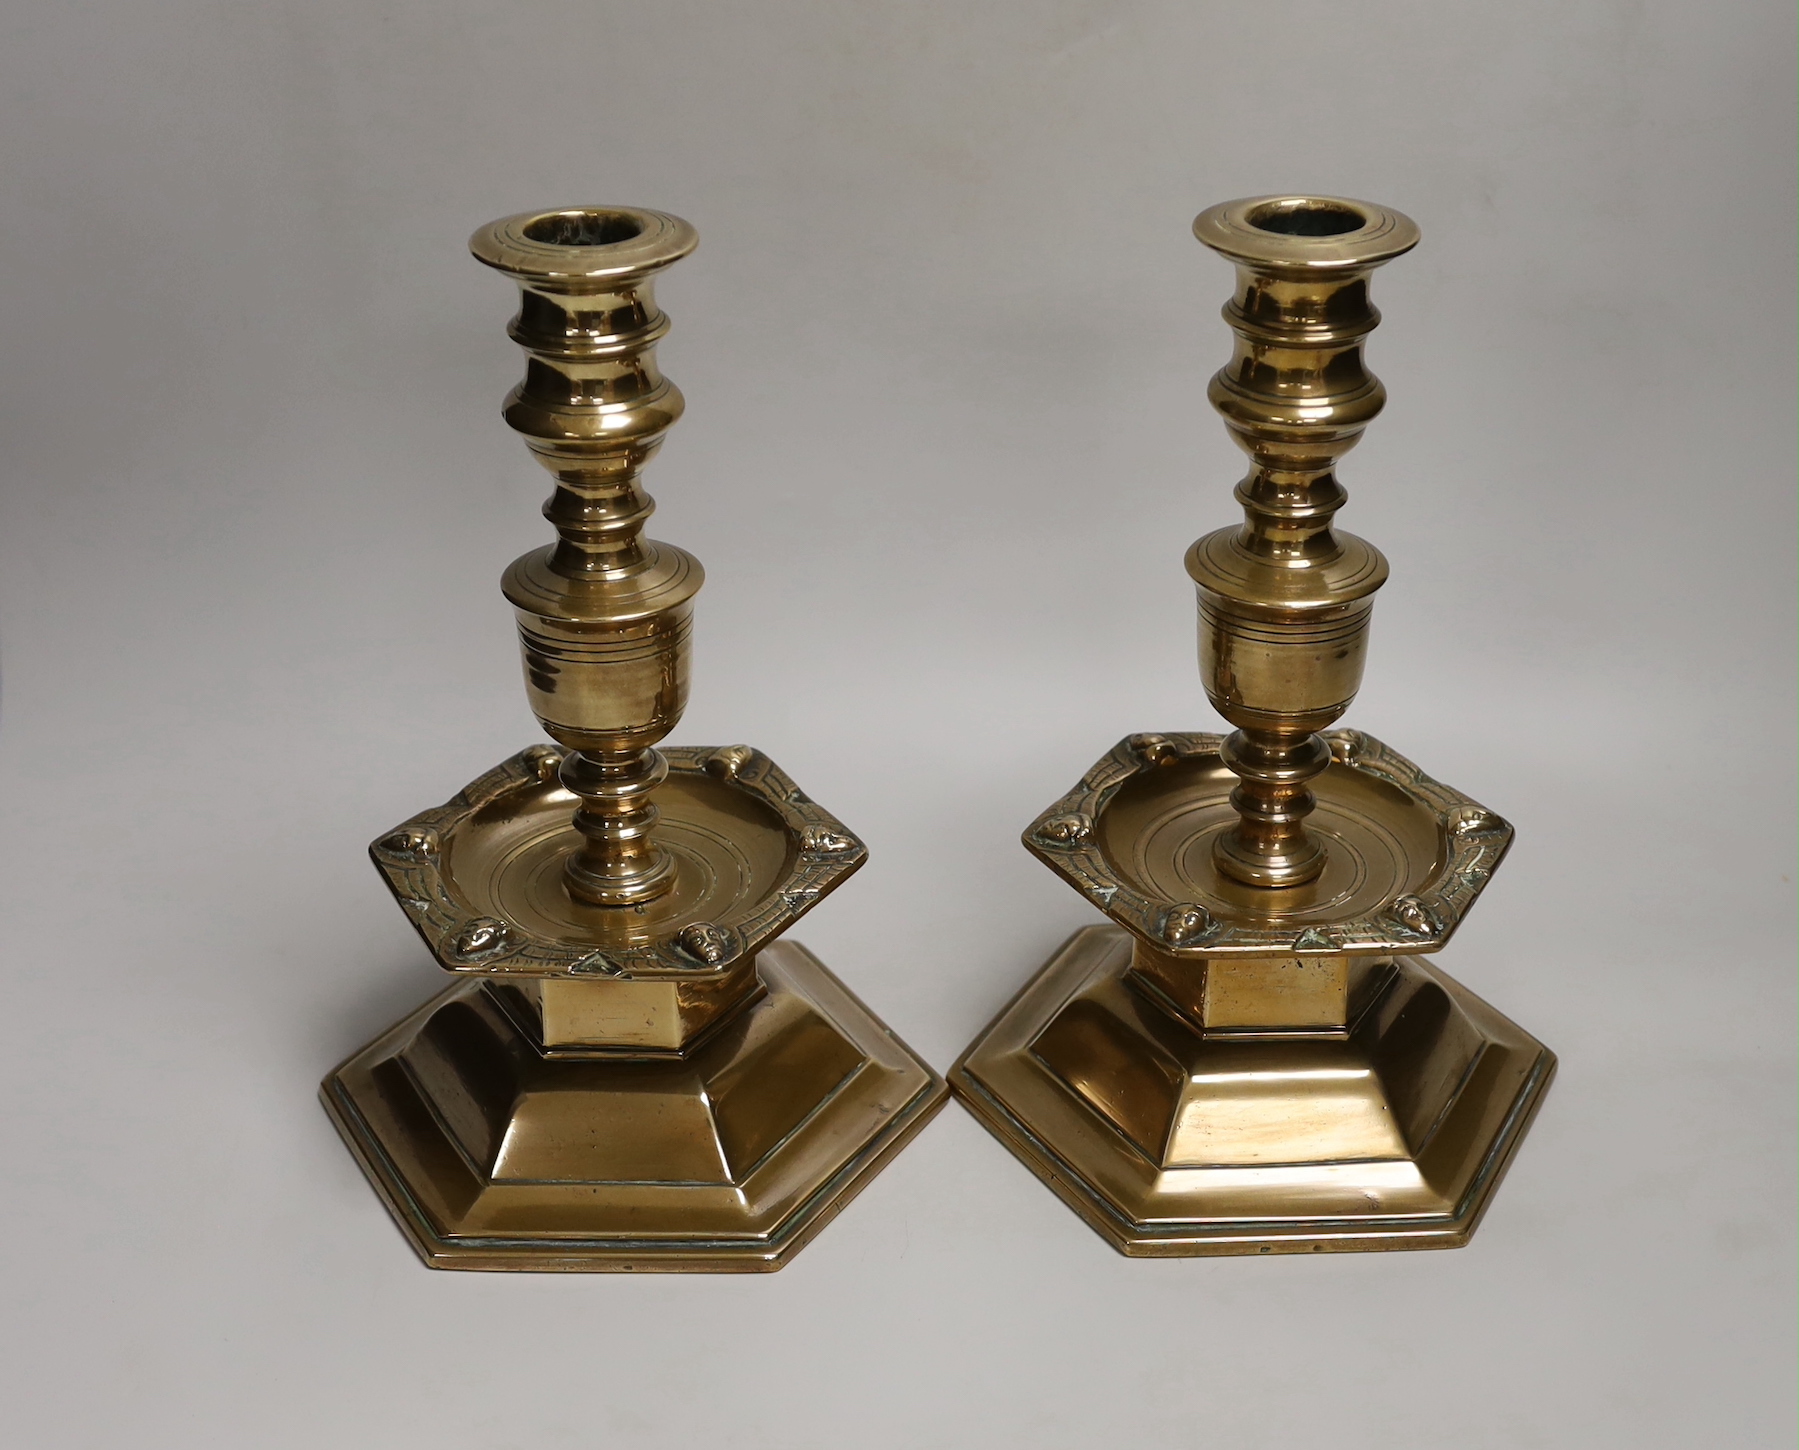 A pair of Scandinavian, possibly 17th century, brass candlesticks, dated 1644, each with a shield enclosing merchants mark, each with hexagonal base and hexagonal drip tray cast with marks, 27cm